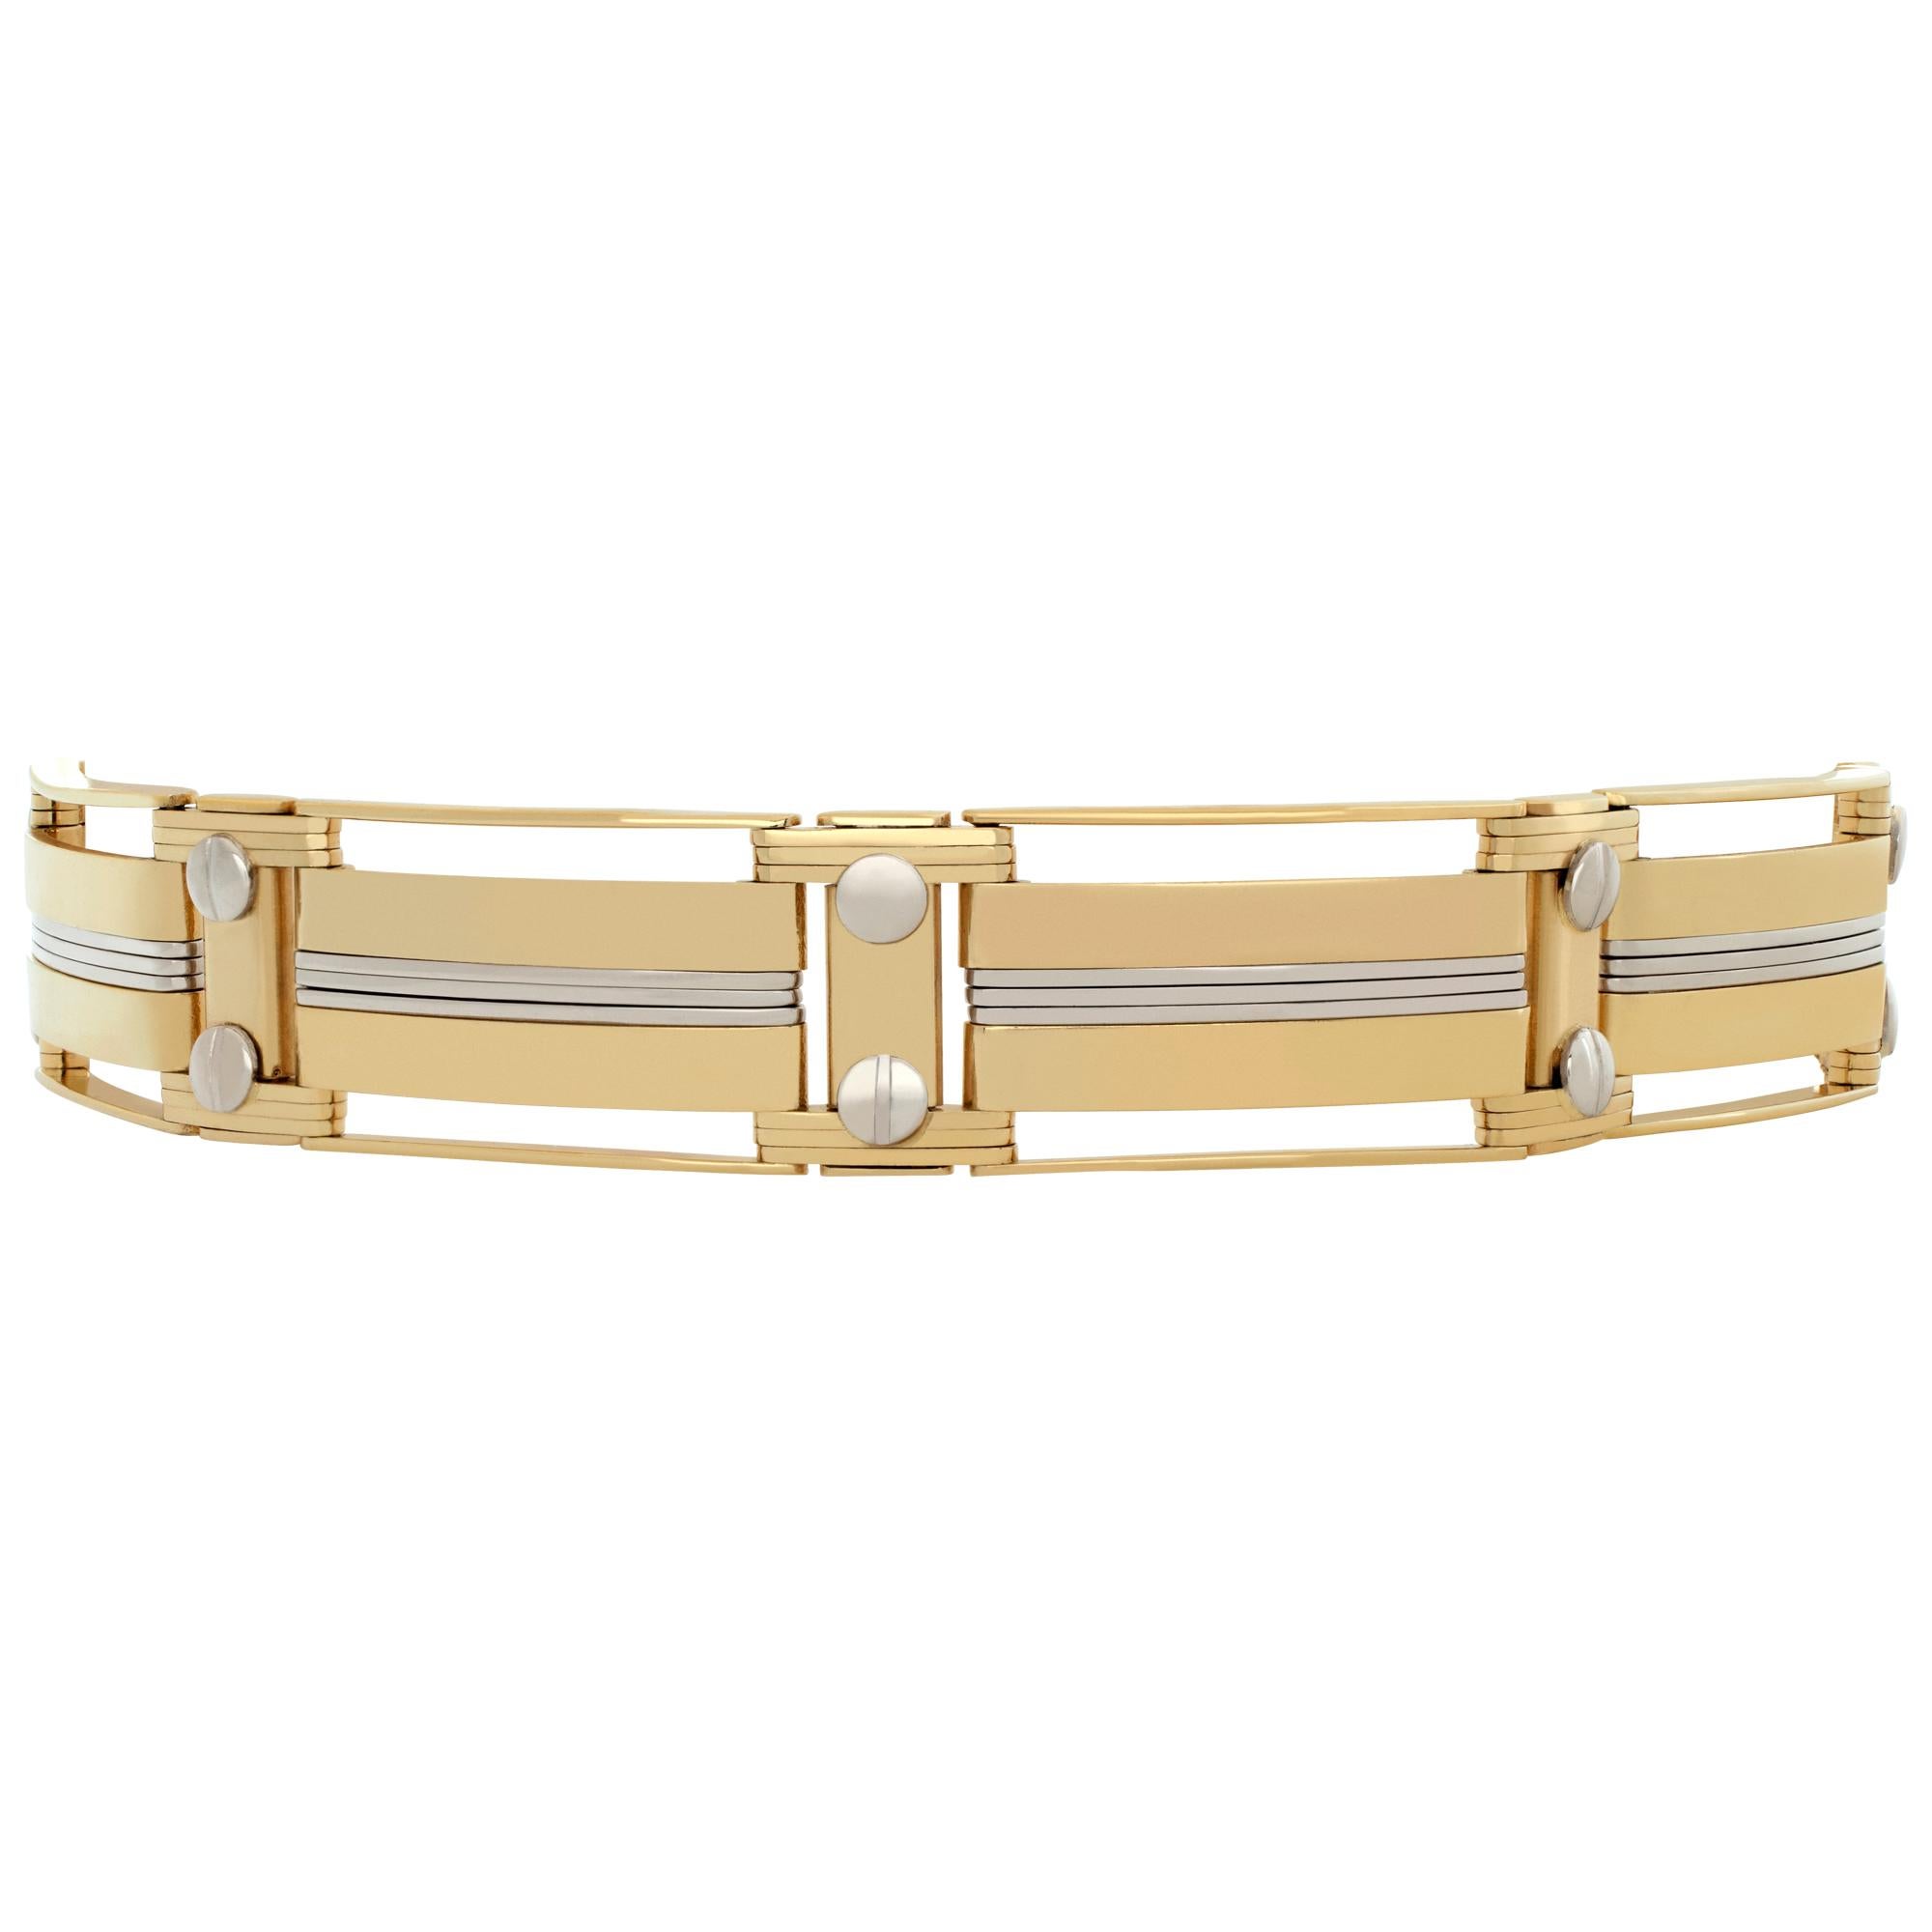 Mens 18k white and yellow gold bracelet with unique design and screws. Length 8.5 inches. Width 12mm.
